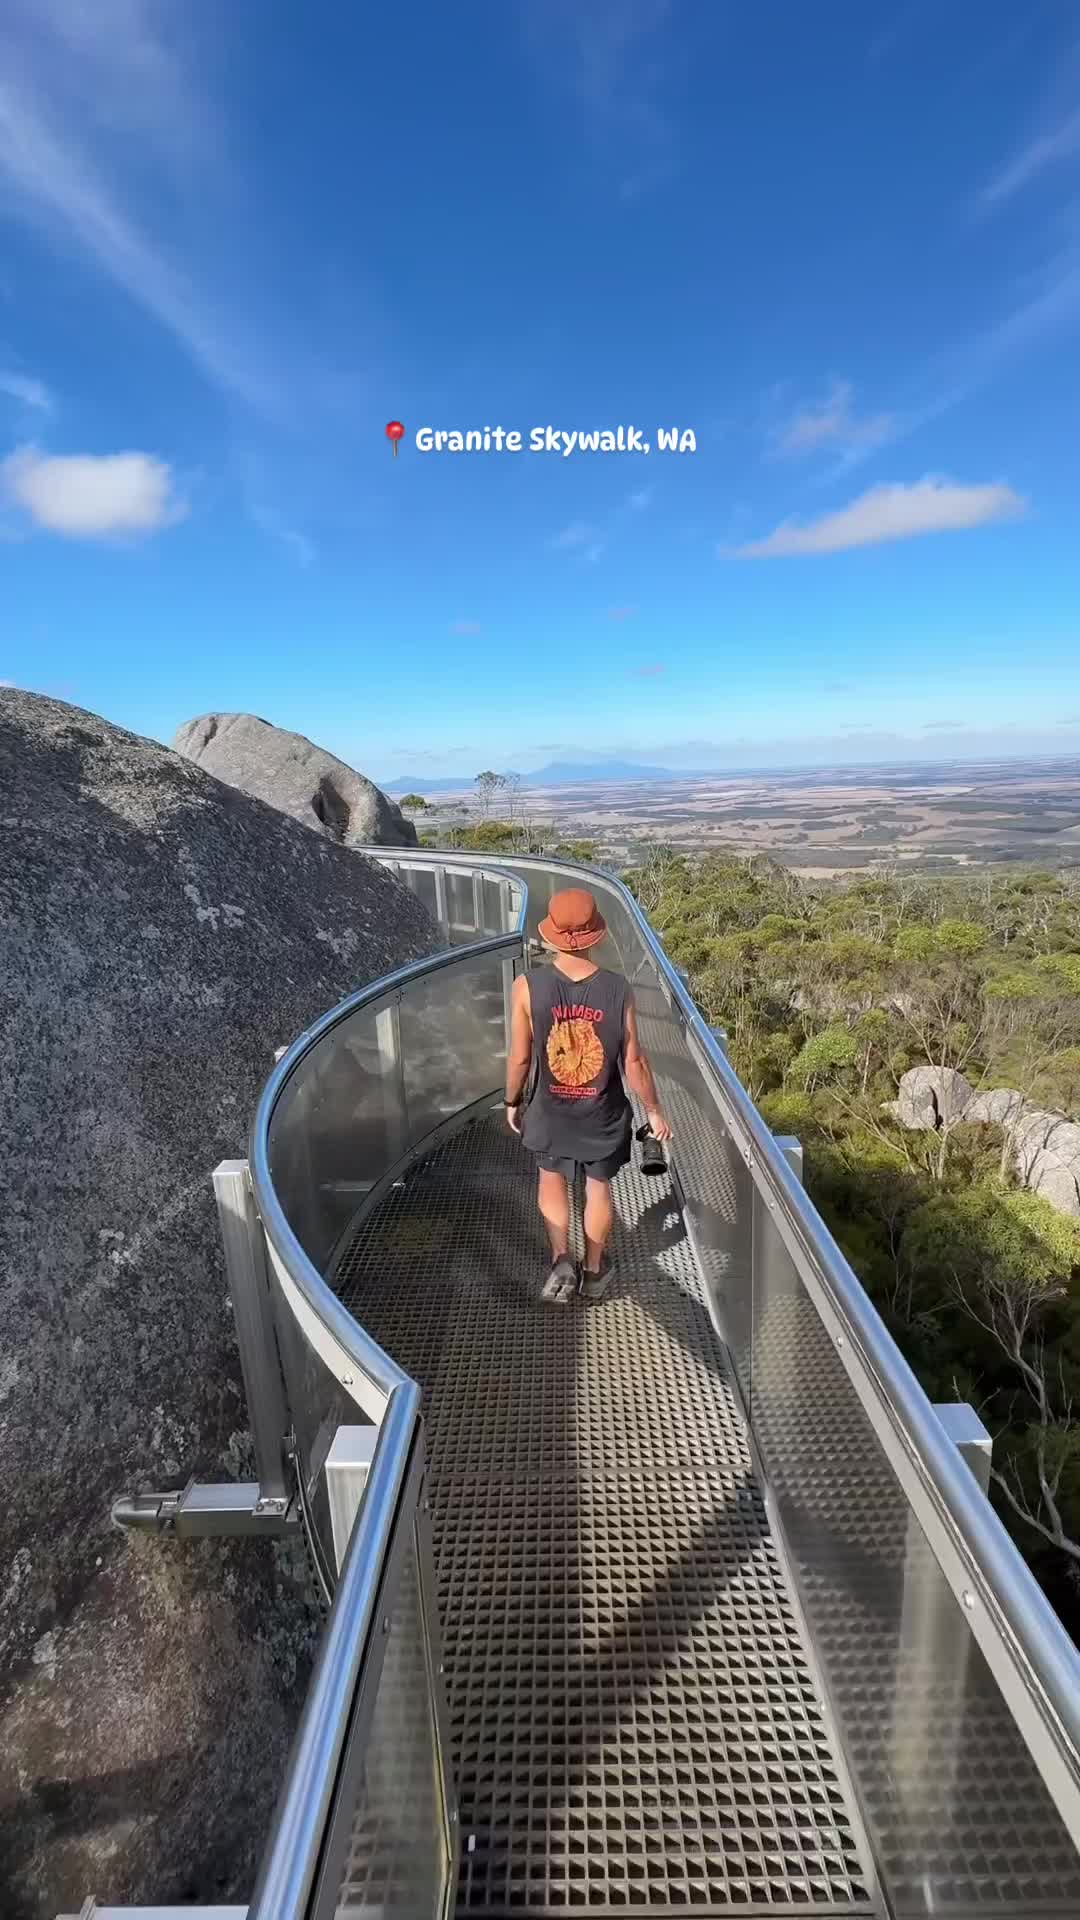 GRANITE SKYWALK 🪨 🦅 Another cheeky bucket list spot ticked off for me as we travel deeper into the South West of @westernaustralia. Some unreal scenes from atop here. The 4.7km return hike is well worth it & definitely needs to be on your WA adventure list!

#WADreamState # WesternAustralia #australia #seeaustralia